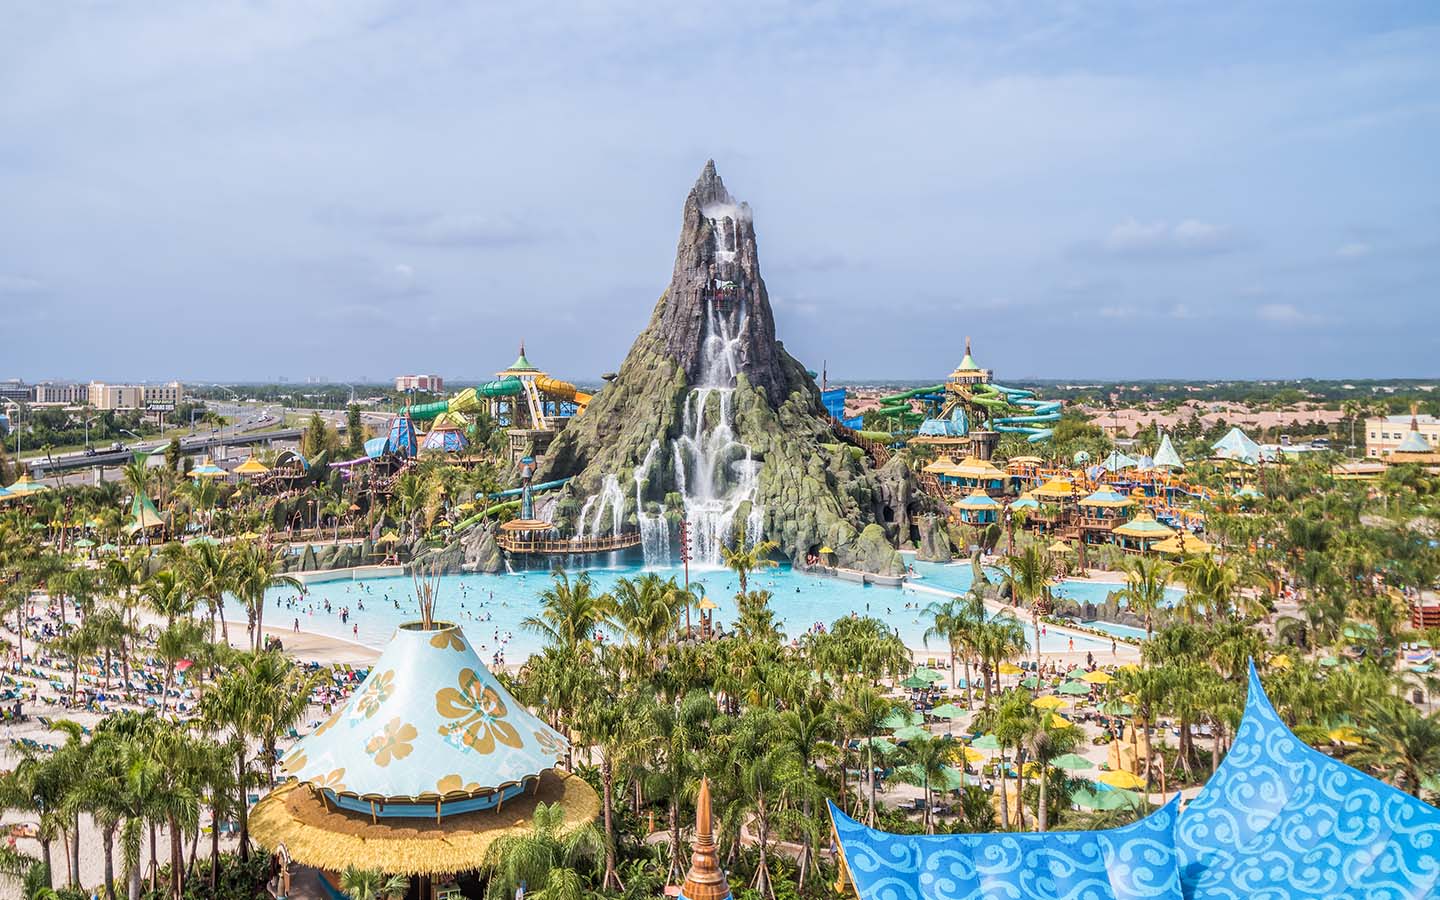 Experience a water park unlike any other at Universal's Volcano Bay.